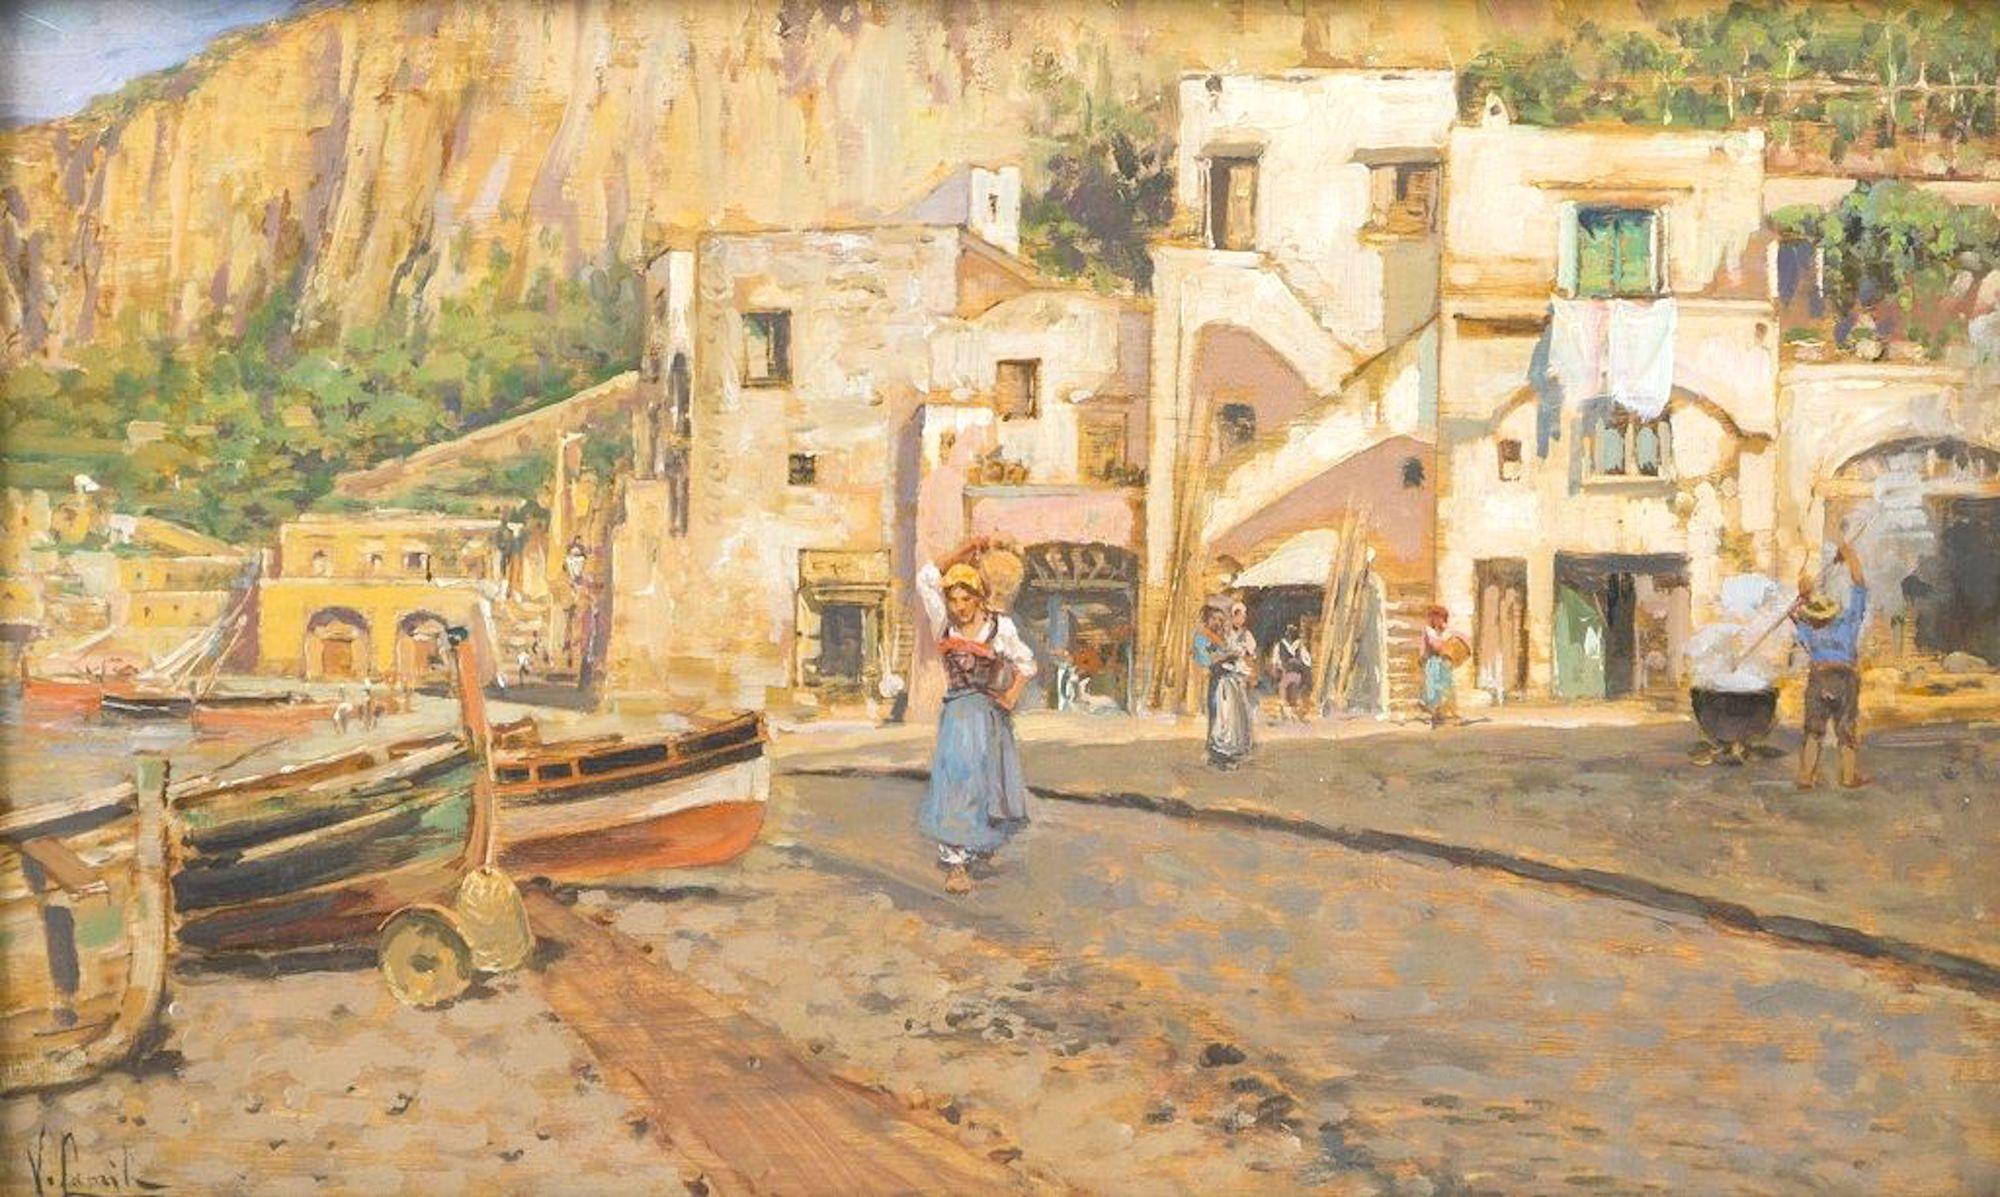 Vincenzo Caprile Landscape Painting - Houses on Shores in Capri - Oil on Board by V. Caprile - Early 20th Century